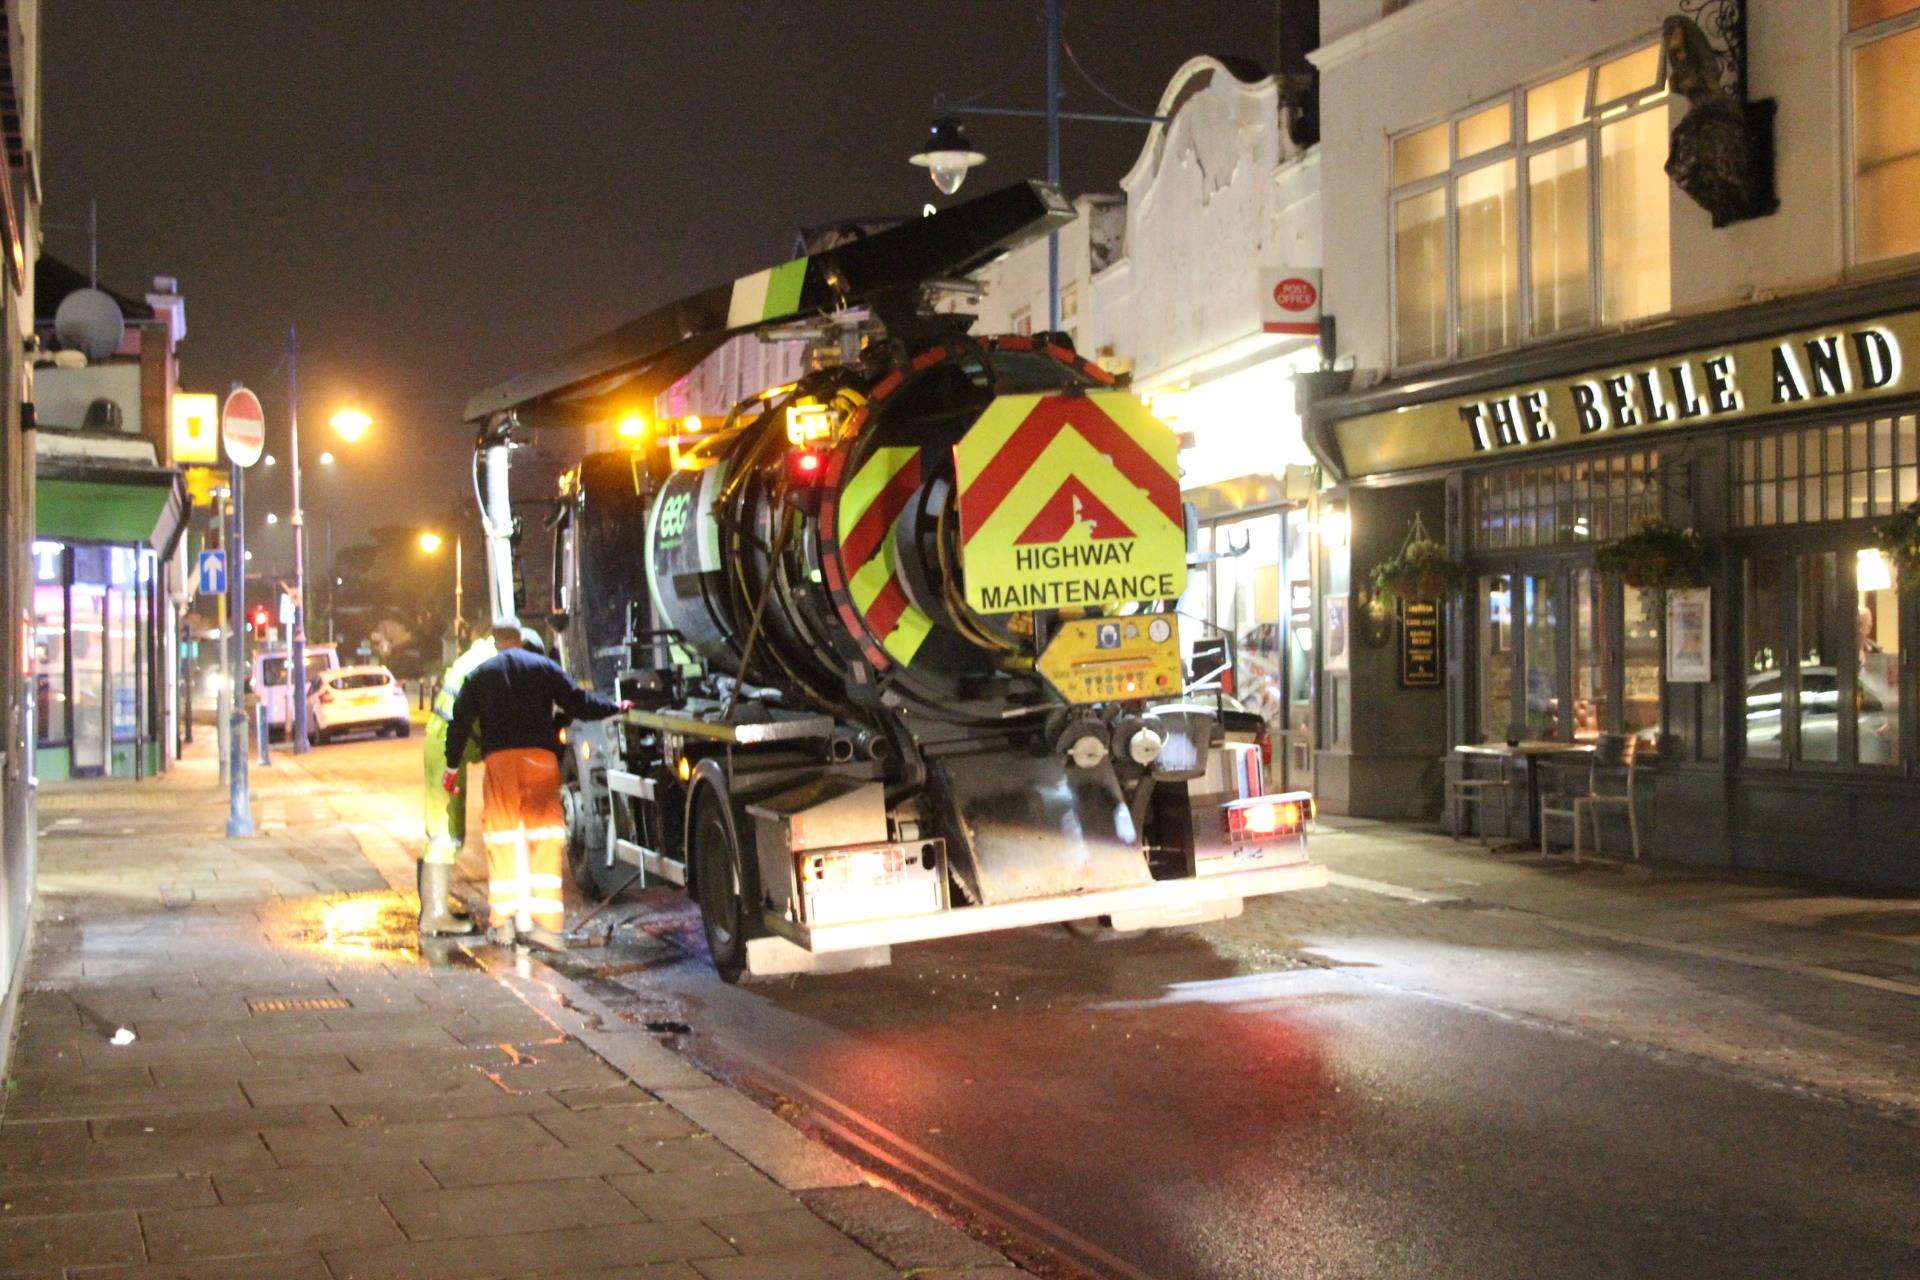 Cleaning drains in Sheerness High Street on Monday night